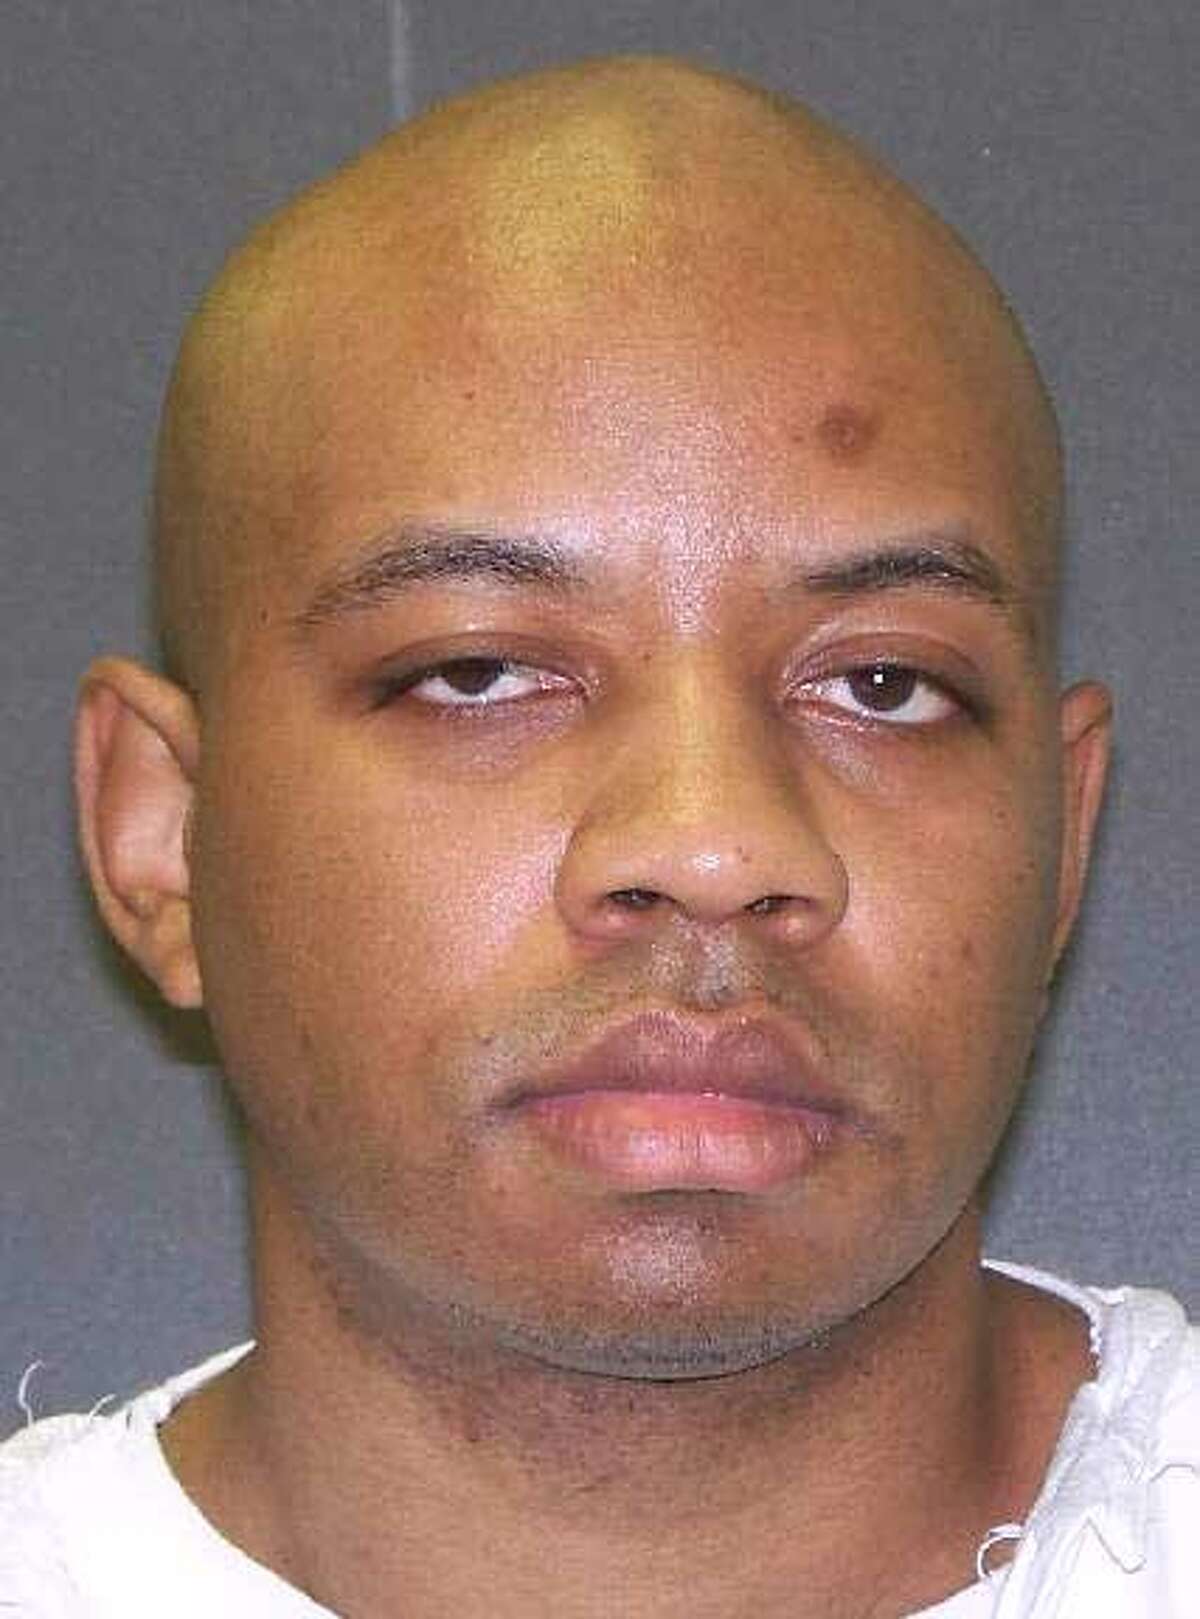 CORRECTS DATE TO MARCH 19 - This undated photo provided by the Texas Department of Criminal Justice shows Ray Jasper III. Jasper, convicted in the 1998 murder of David Alejandro, is set for lethal injection Wednesday evening, March 19, 2014. (AP Photo/Texas Department of Criminal Justice)